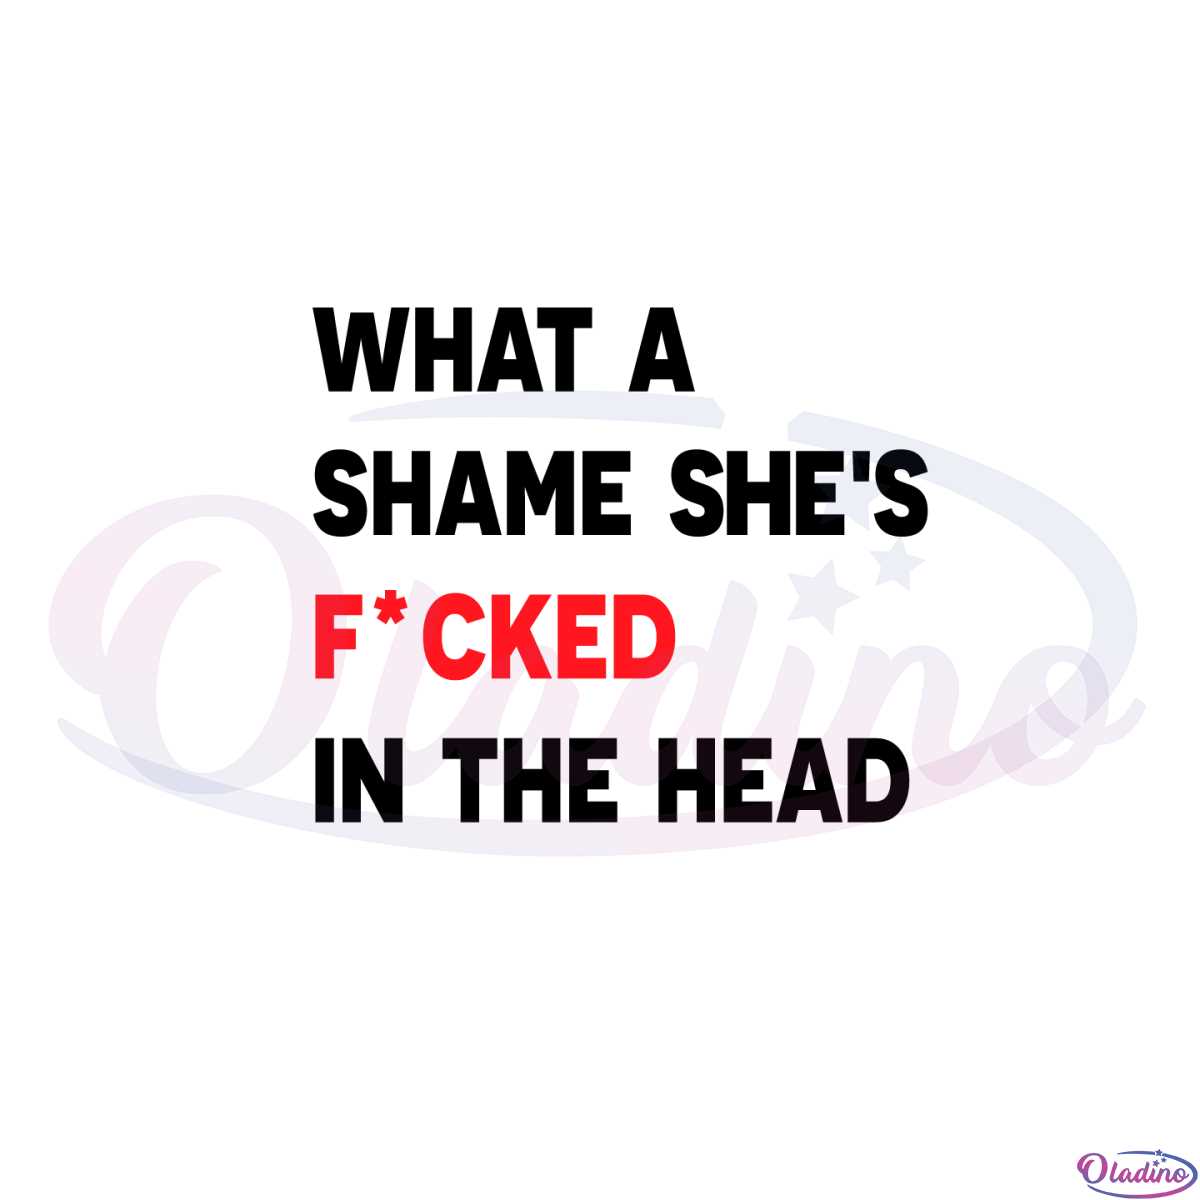 taylor-swift-champagne-problems-what-a-shame-shes-fucked-in-the-head-svg